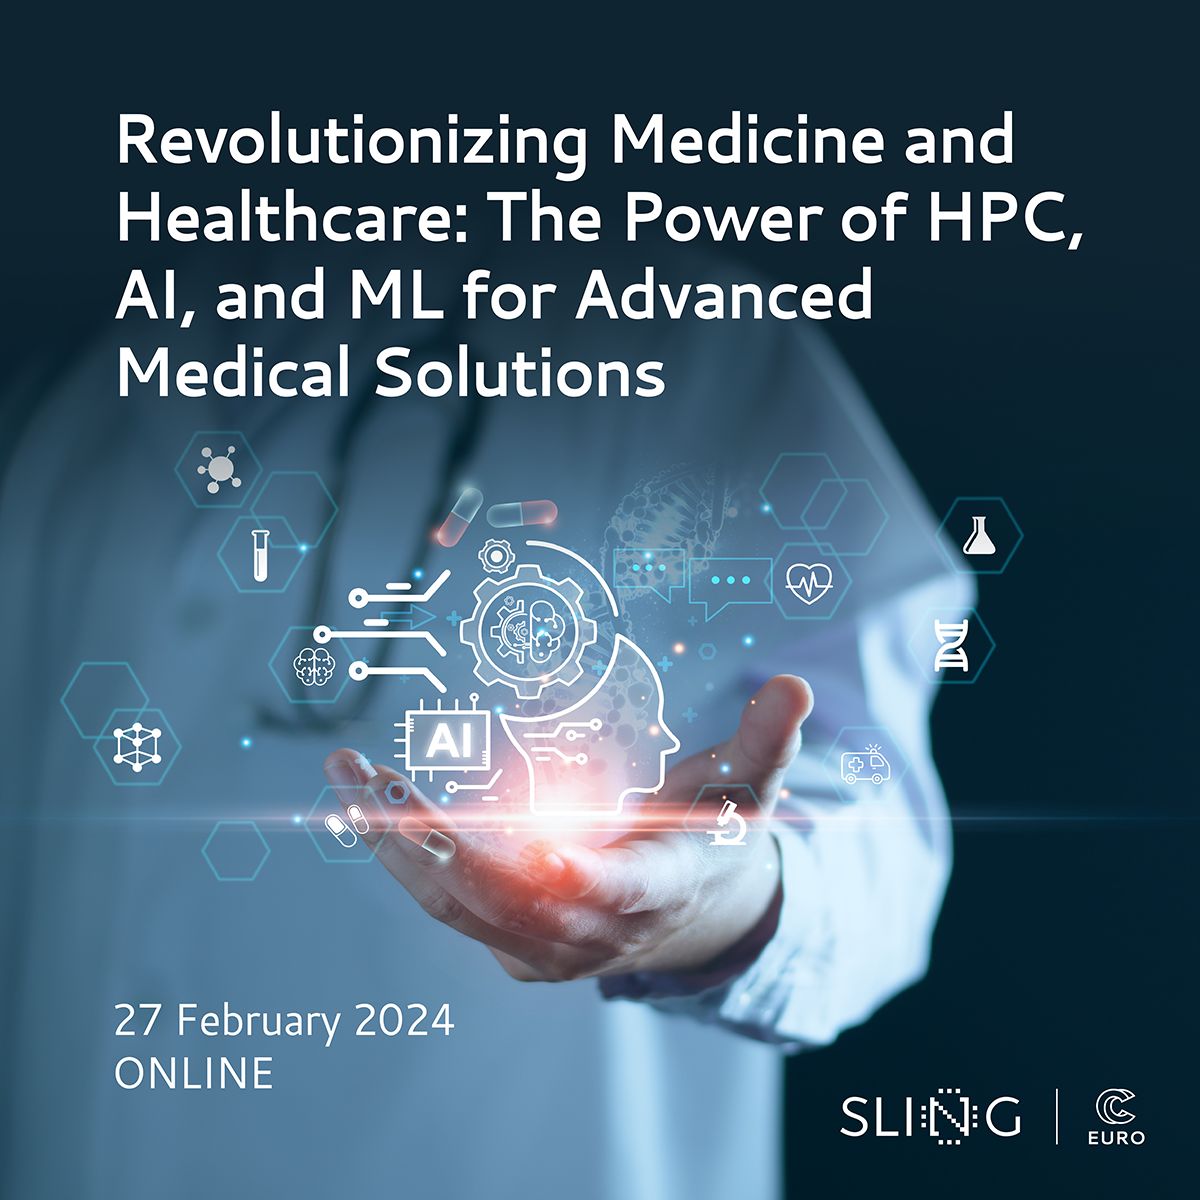 Spletni dogodek: Revolutionizing Medicine and Healthcare: The Power of HPC, AI, and ML for Advanced Medical Solutions